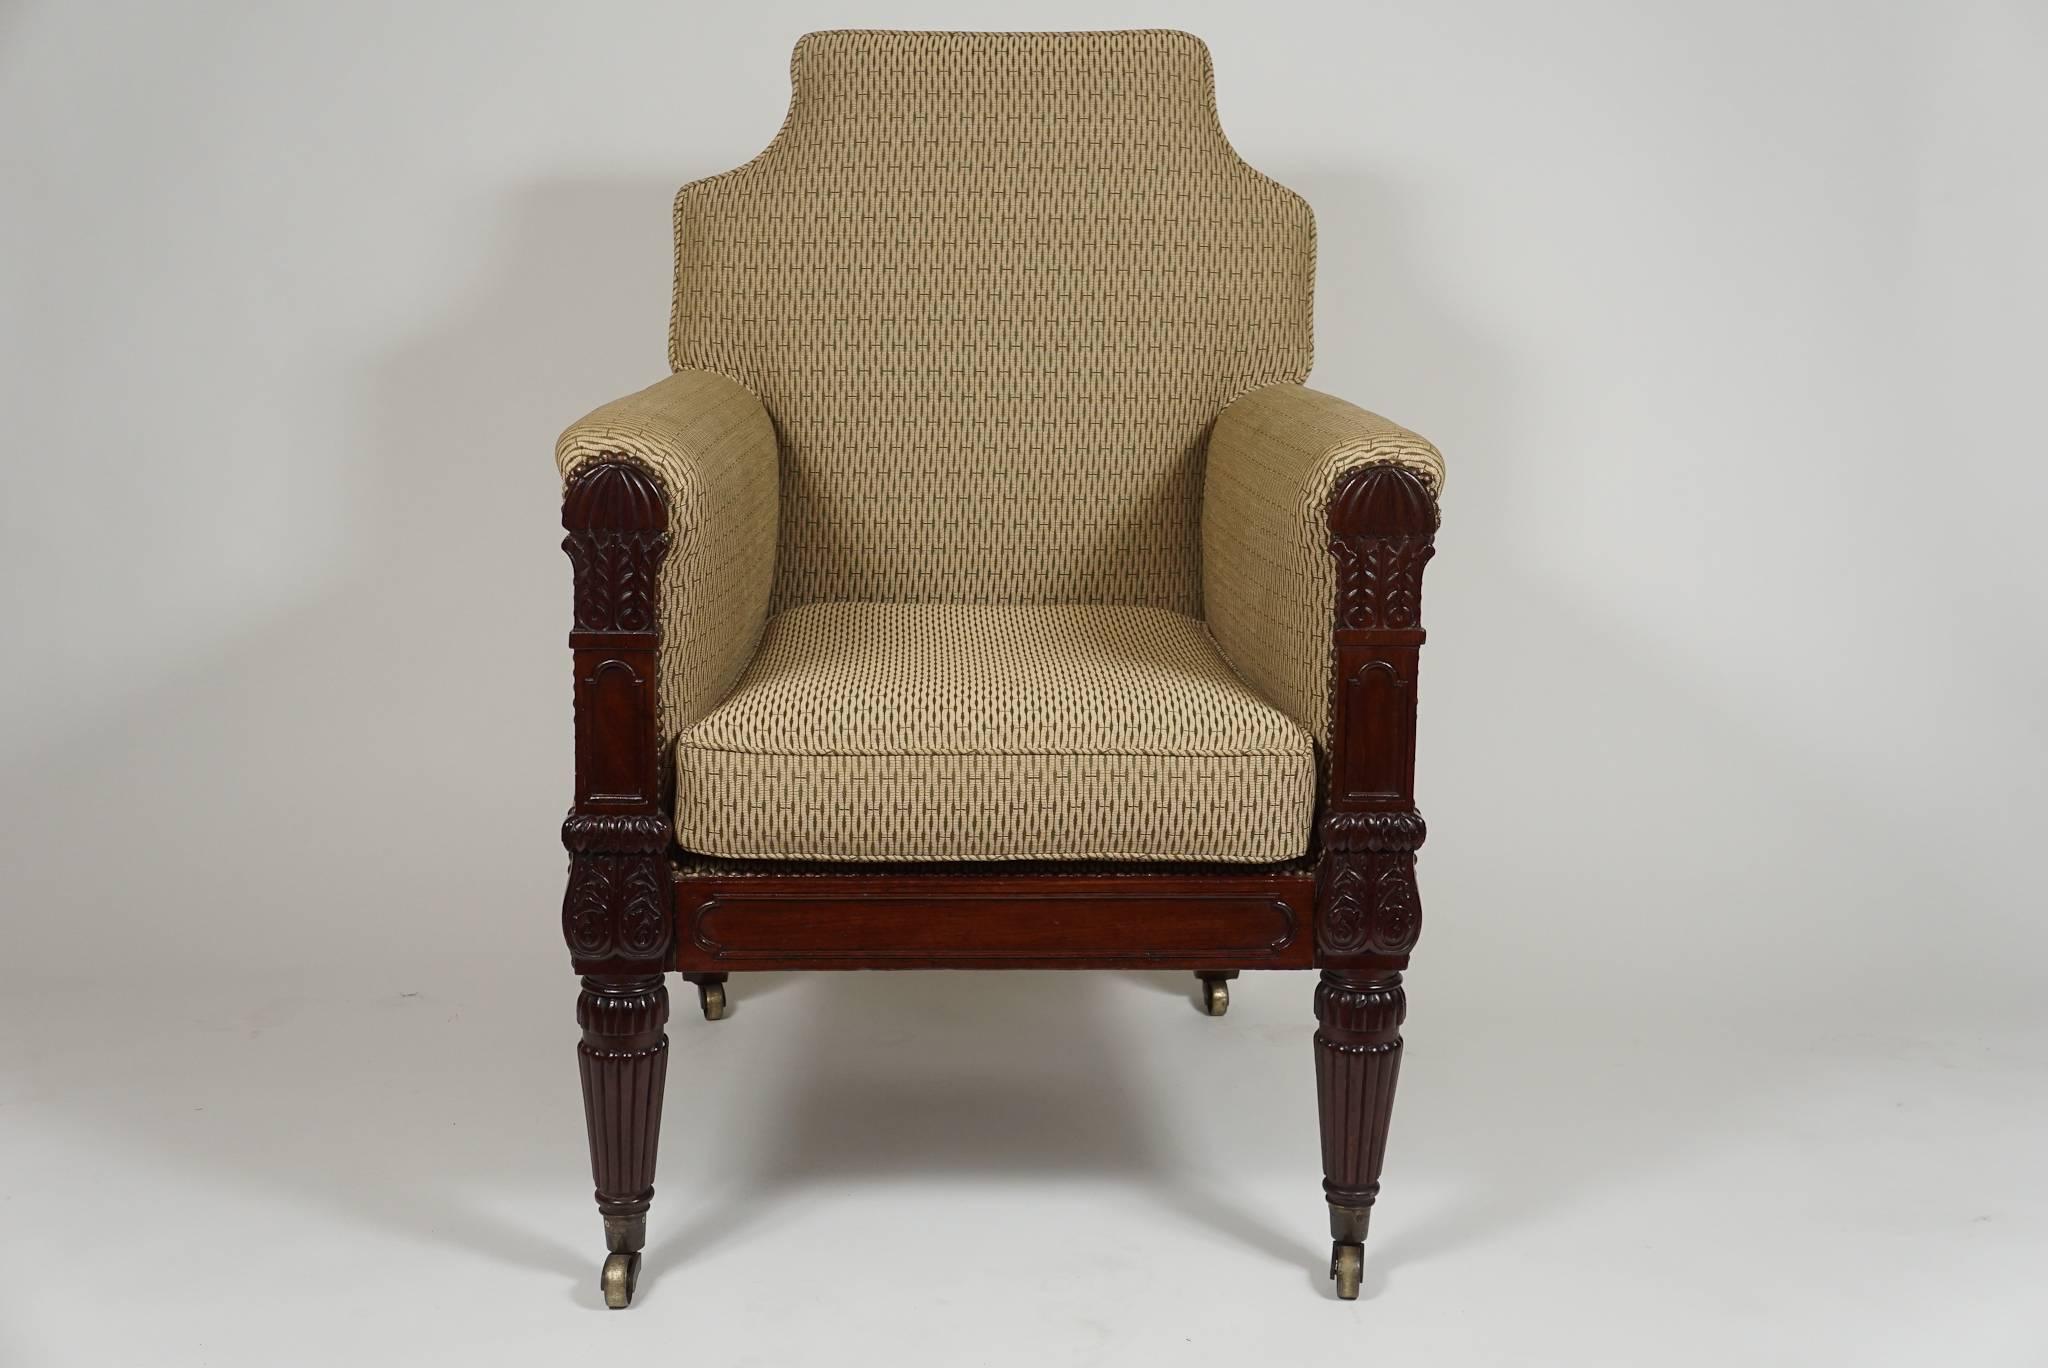 George III English Regency Mahogany Bergere or Armchair, circa 1815 In Good Condition For Sale In Kinderhook, NY